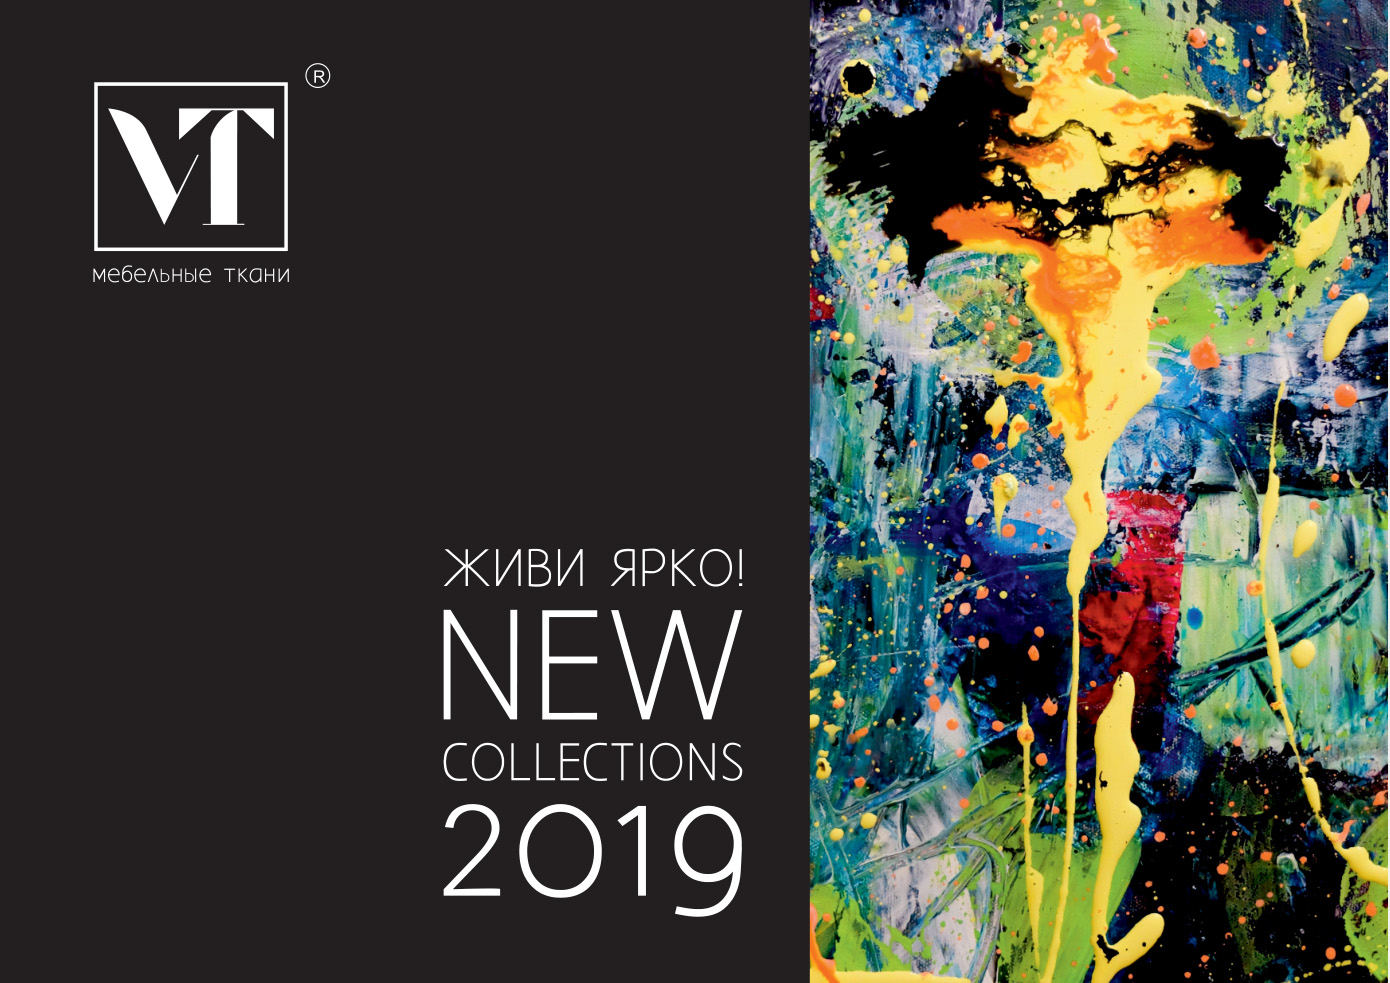 Catalogue NEWcollection 2019